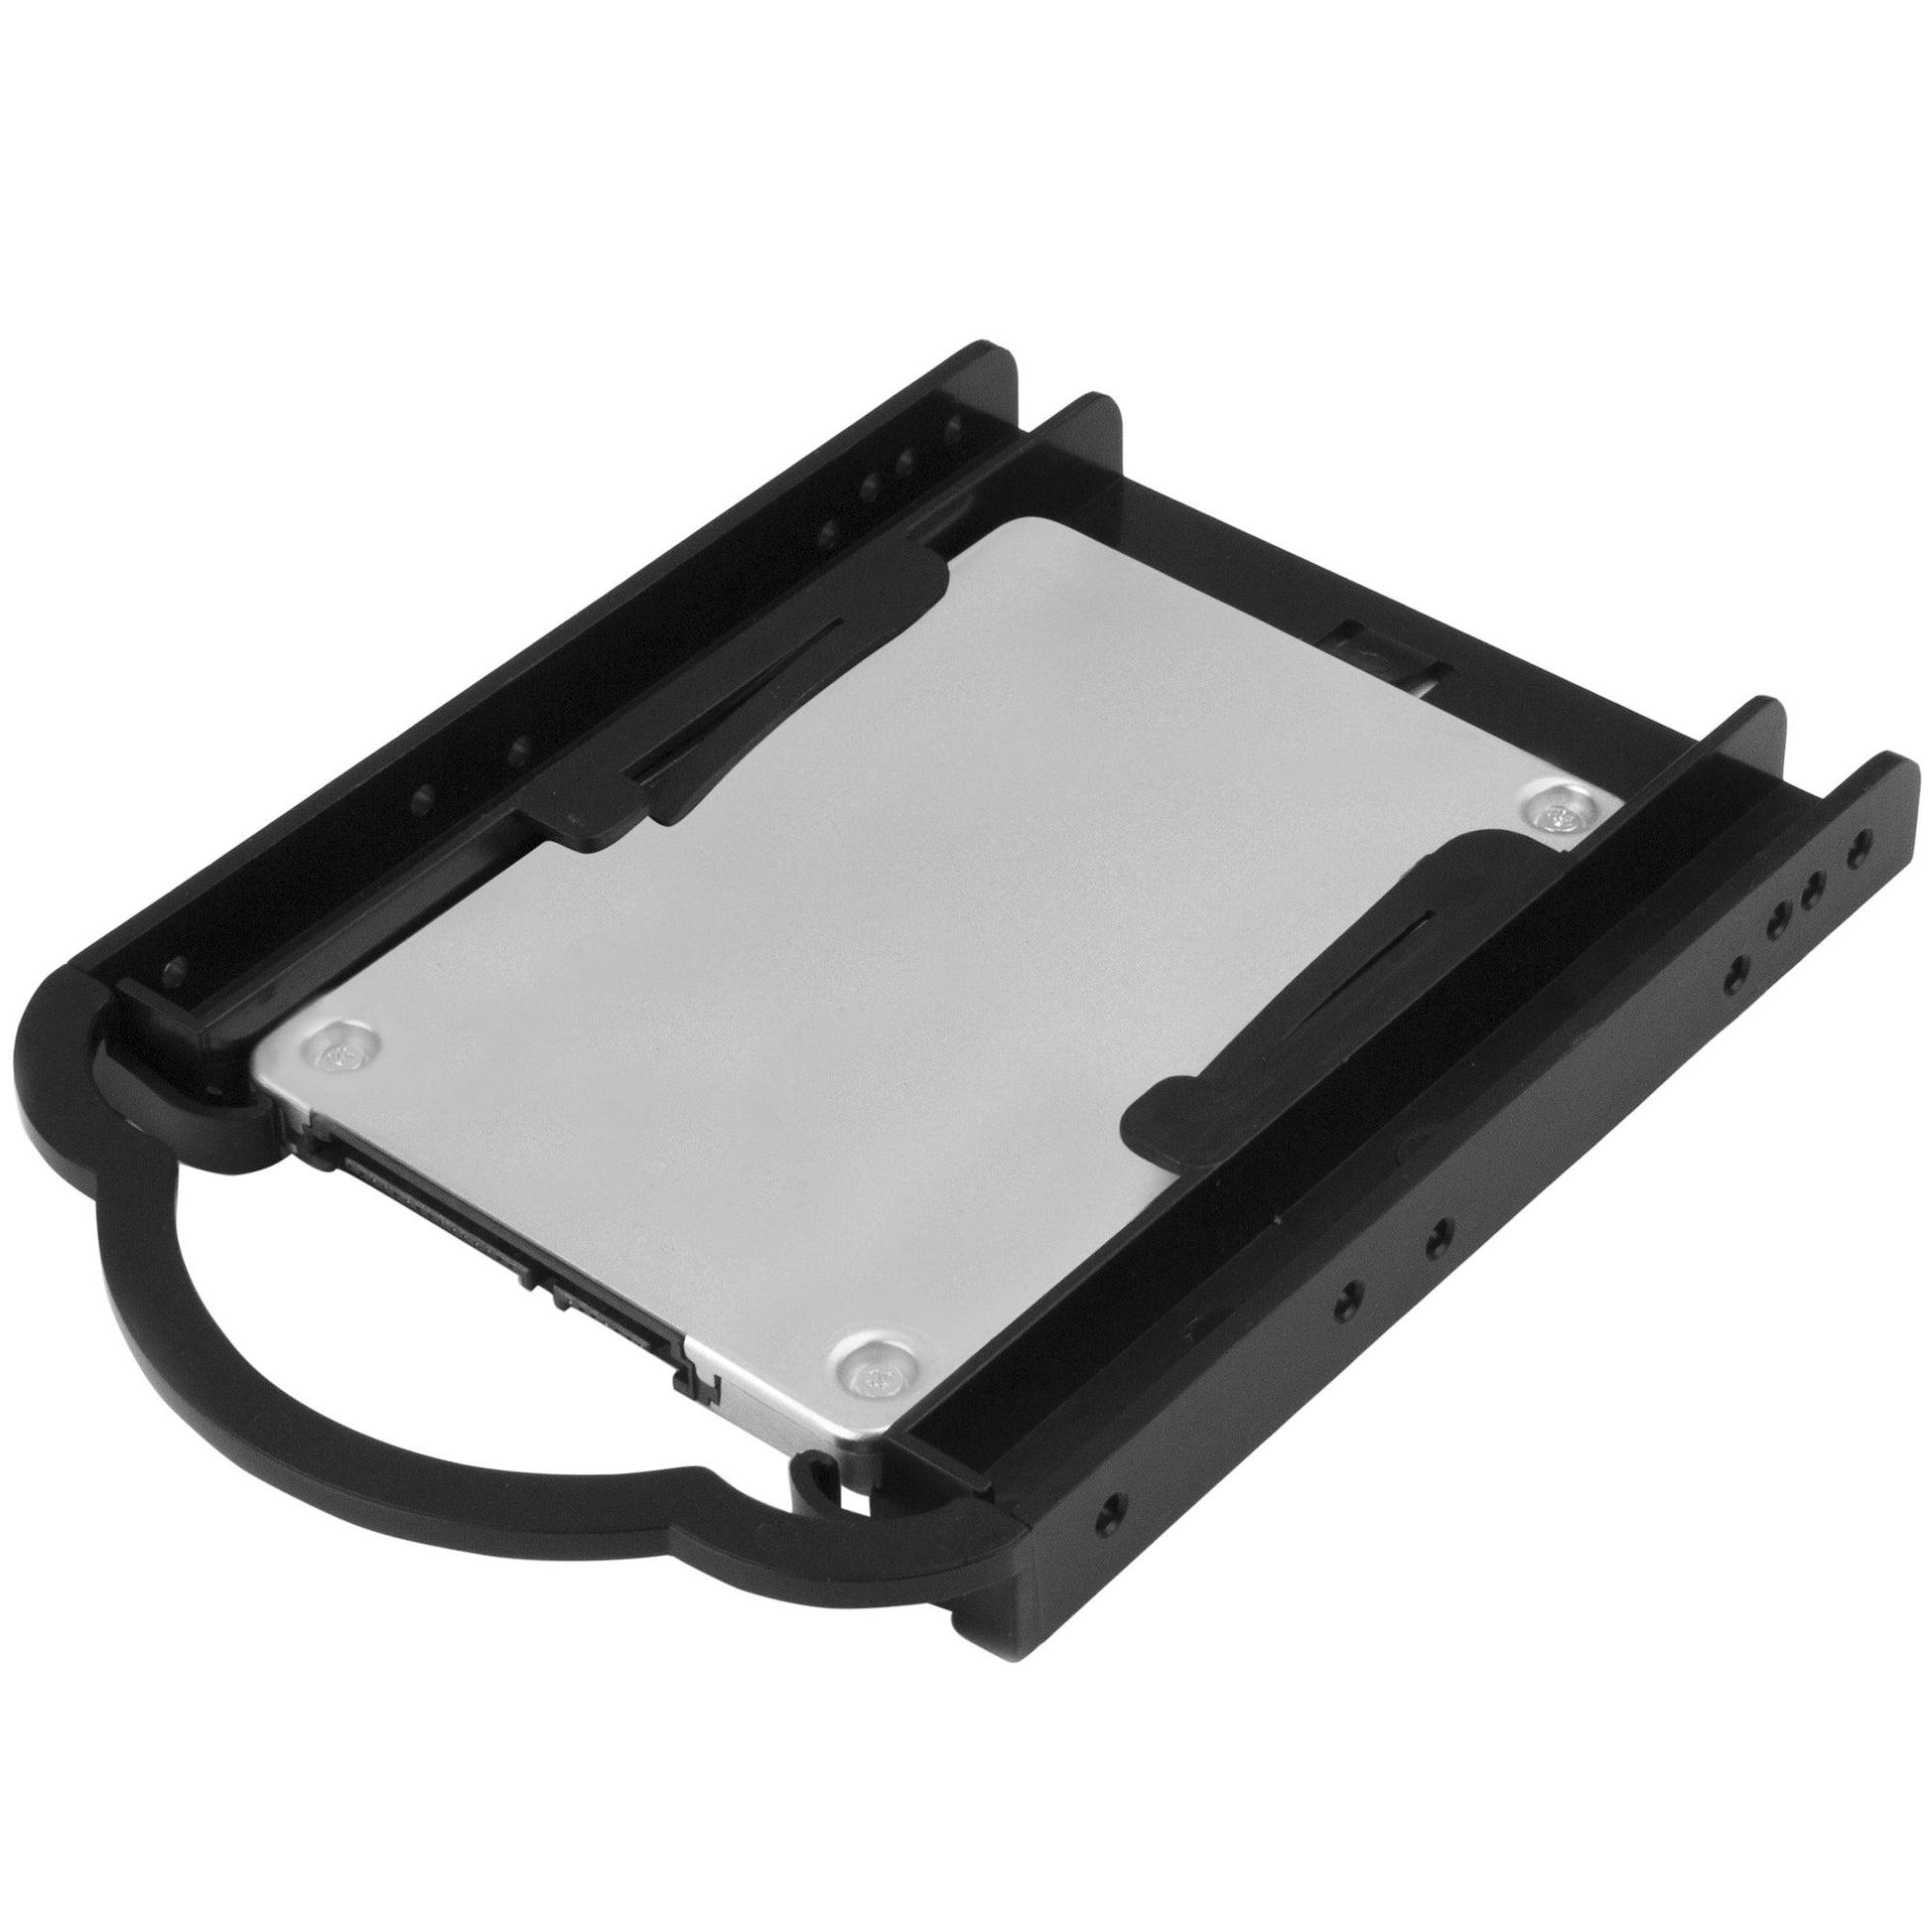 StarTech.com 2.5" SSD/HDD Mounting Bracket for 3.5" Drive Bay - Tool-less Installation-4